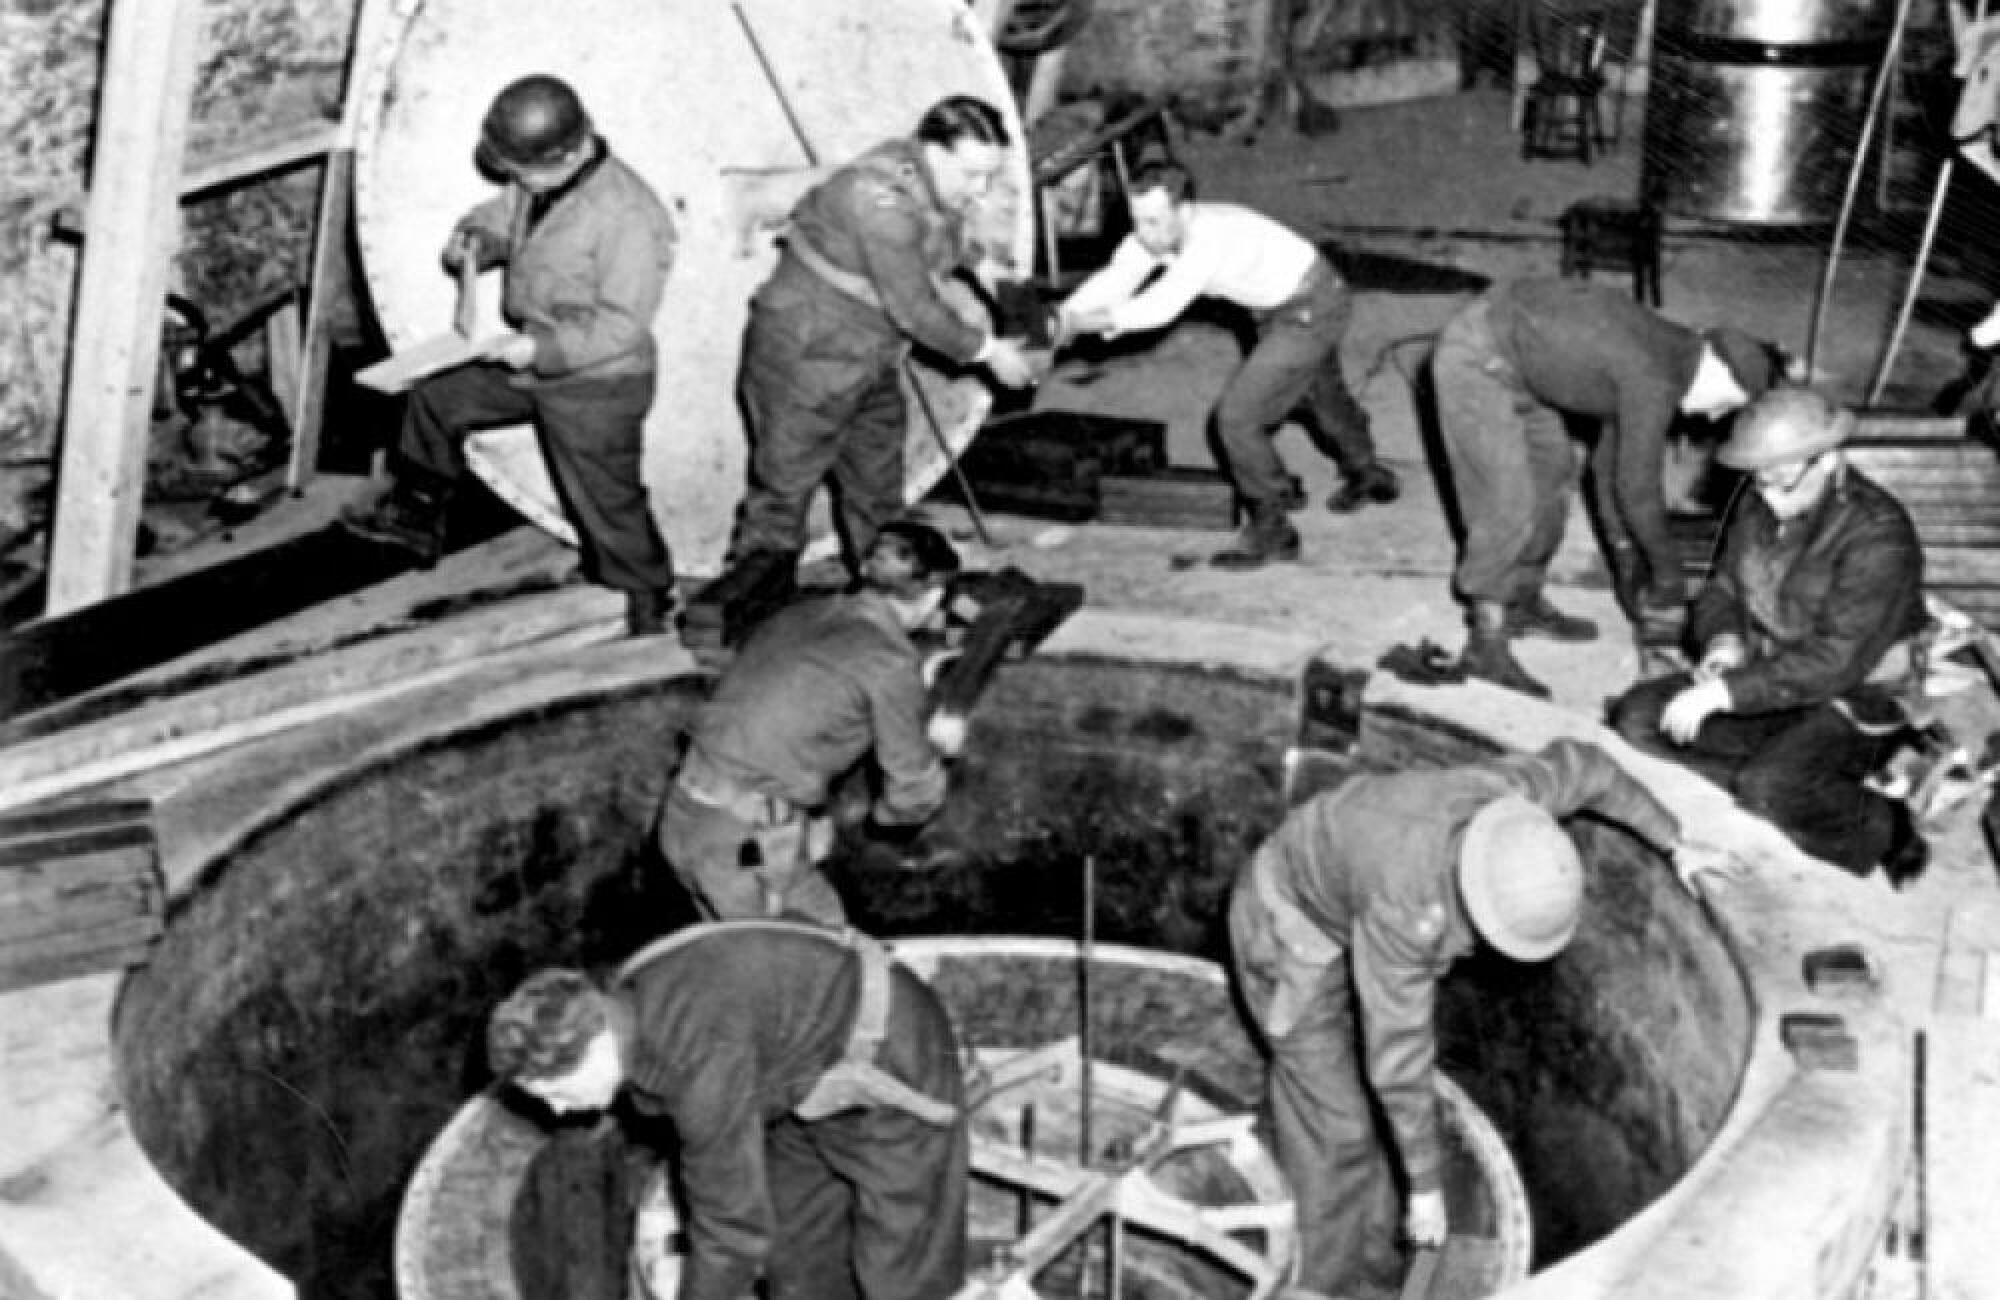 In 1945, the U.S. and British took apart the German experimental nuclear reactor.